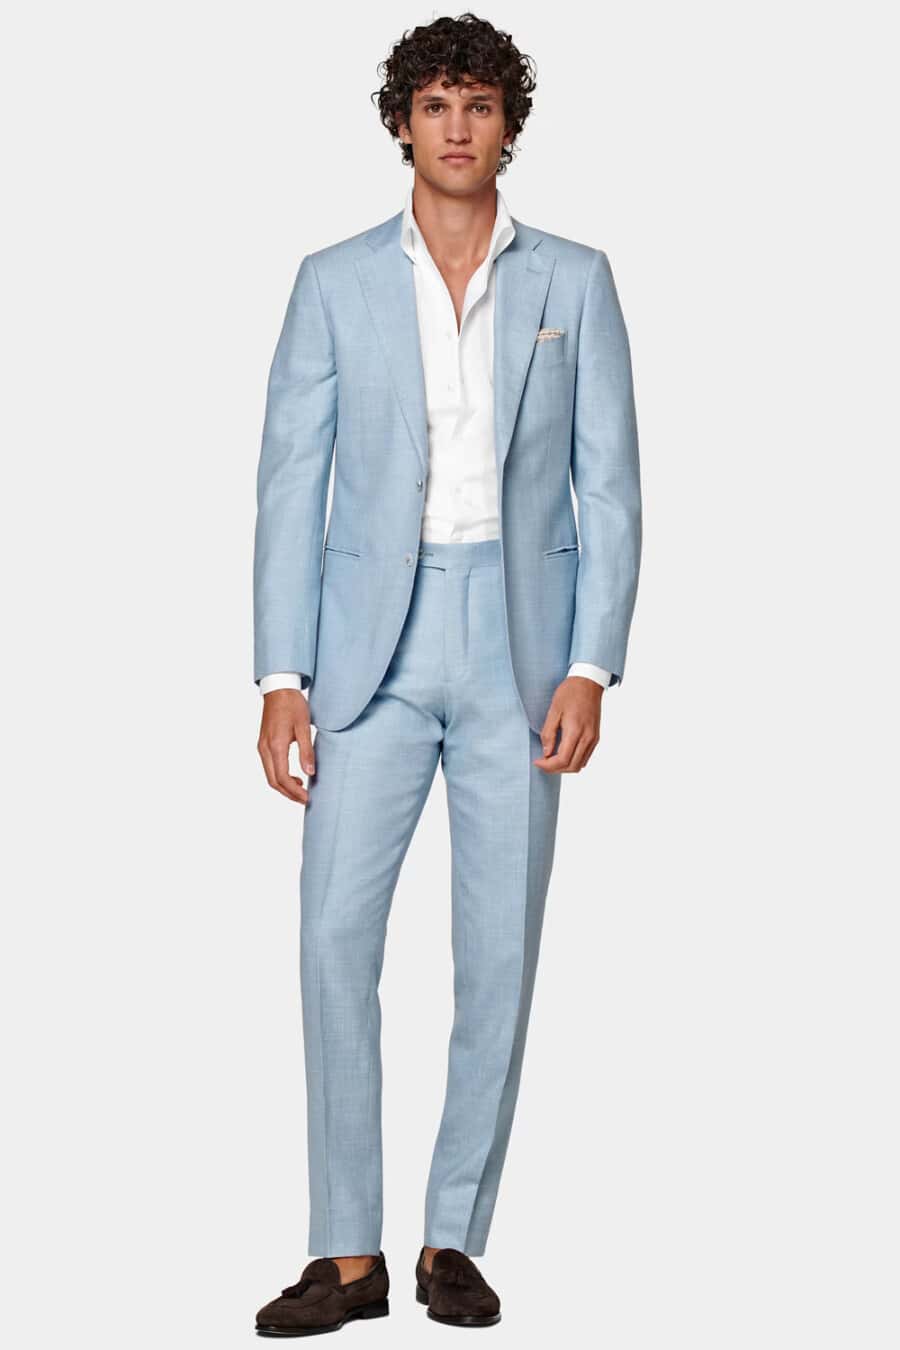 Men's light/sky blue suit, white shirt and brown suede tassel loafers outfit